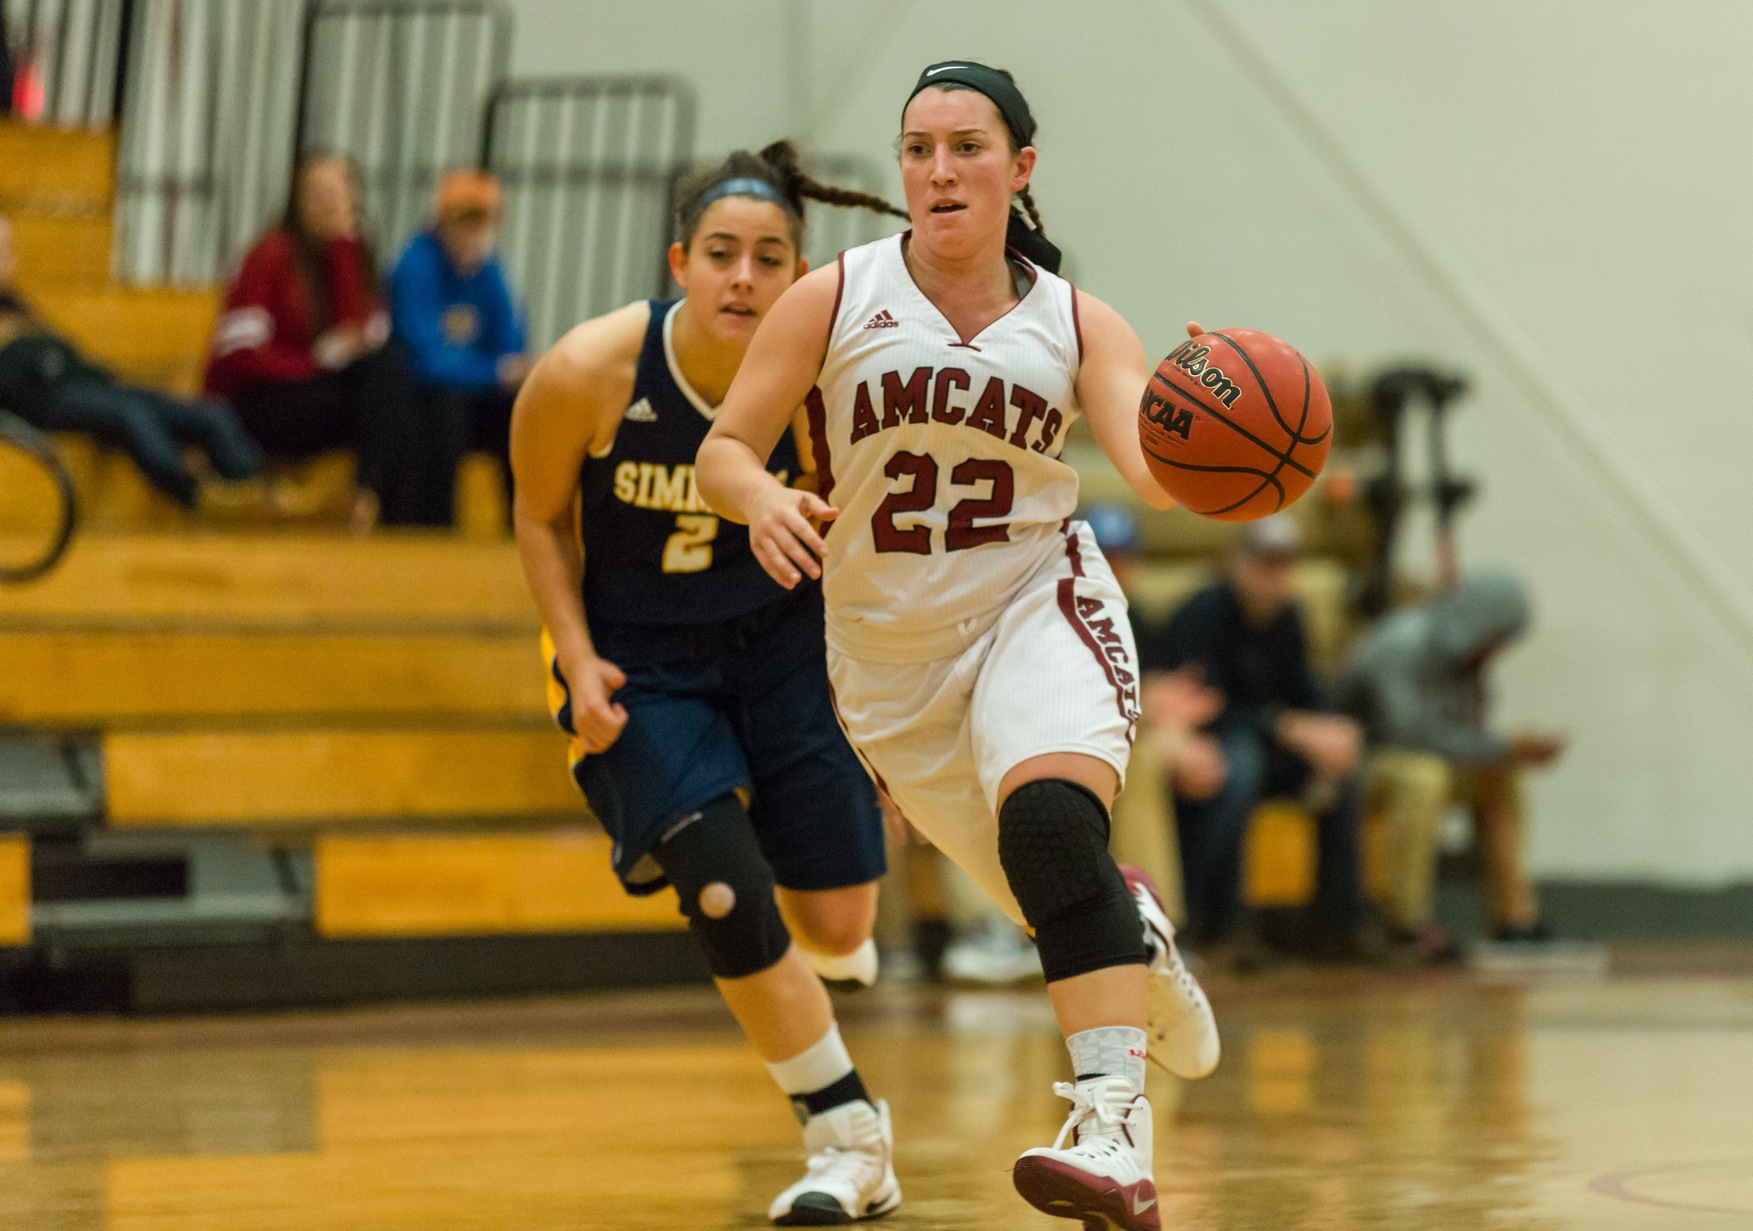 Russo Named to All-Tournament Team; AMCATS lose to Hunter